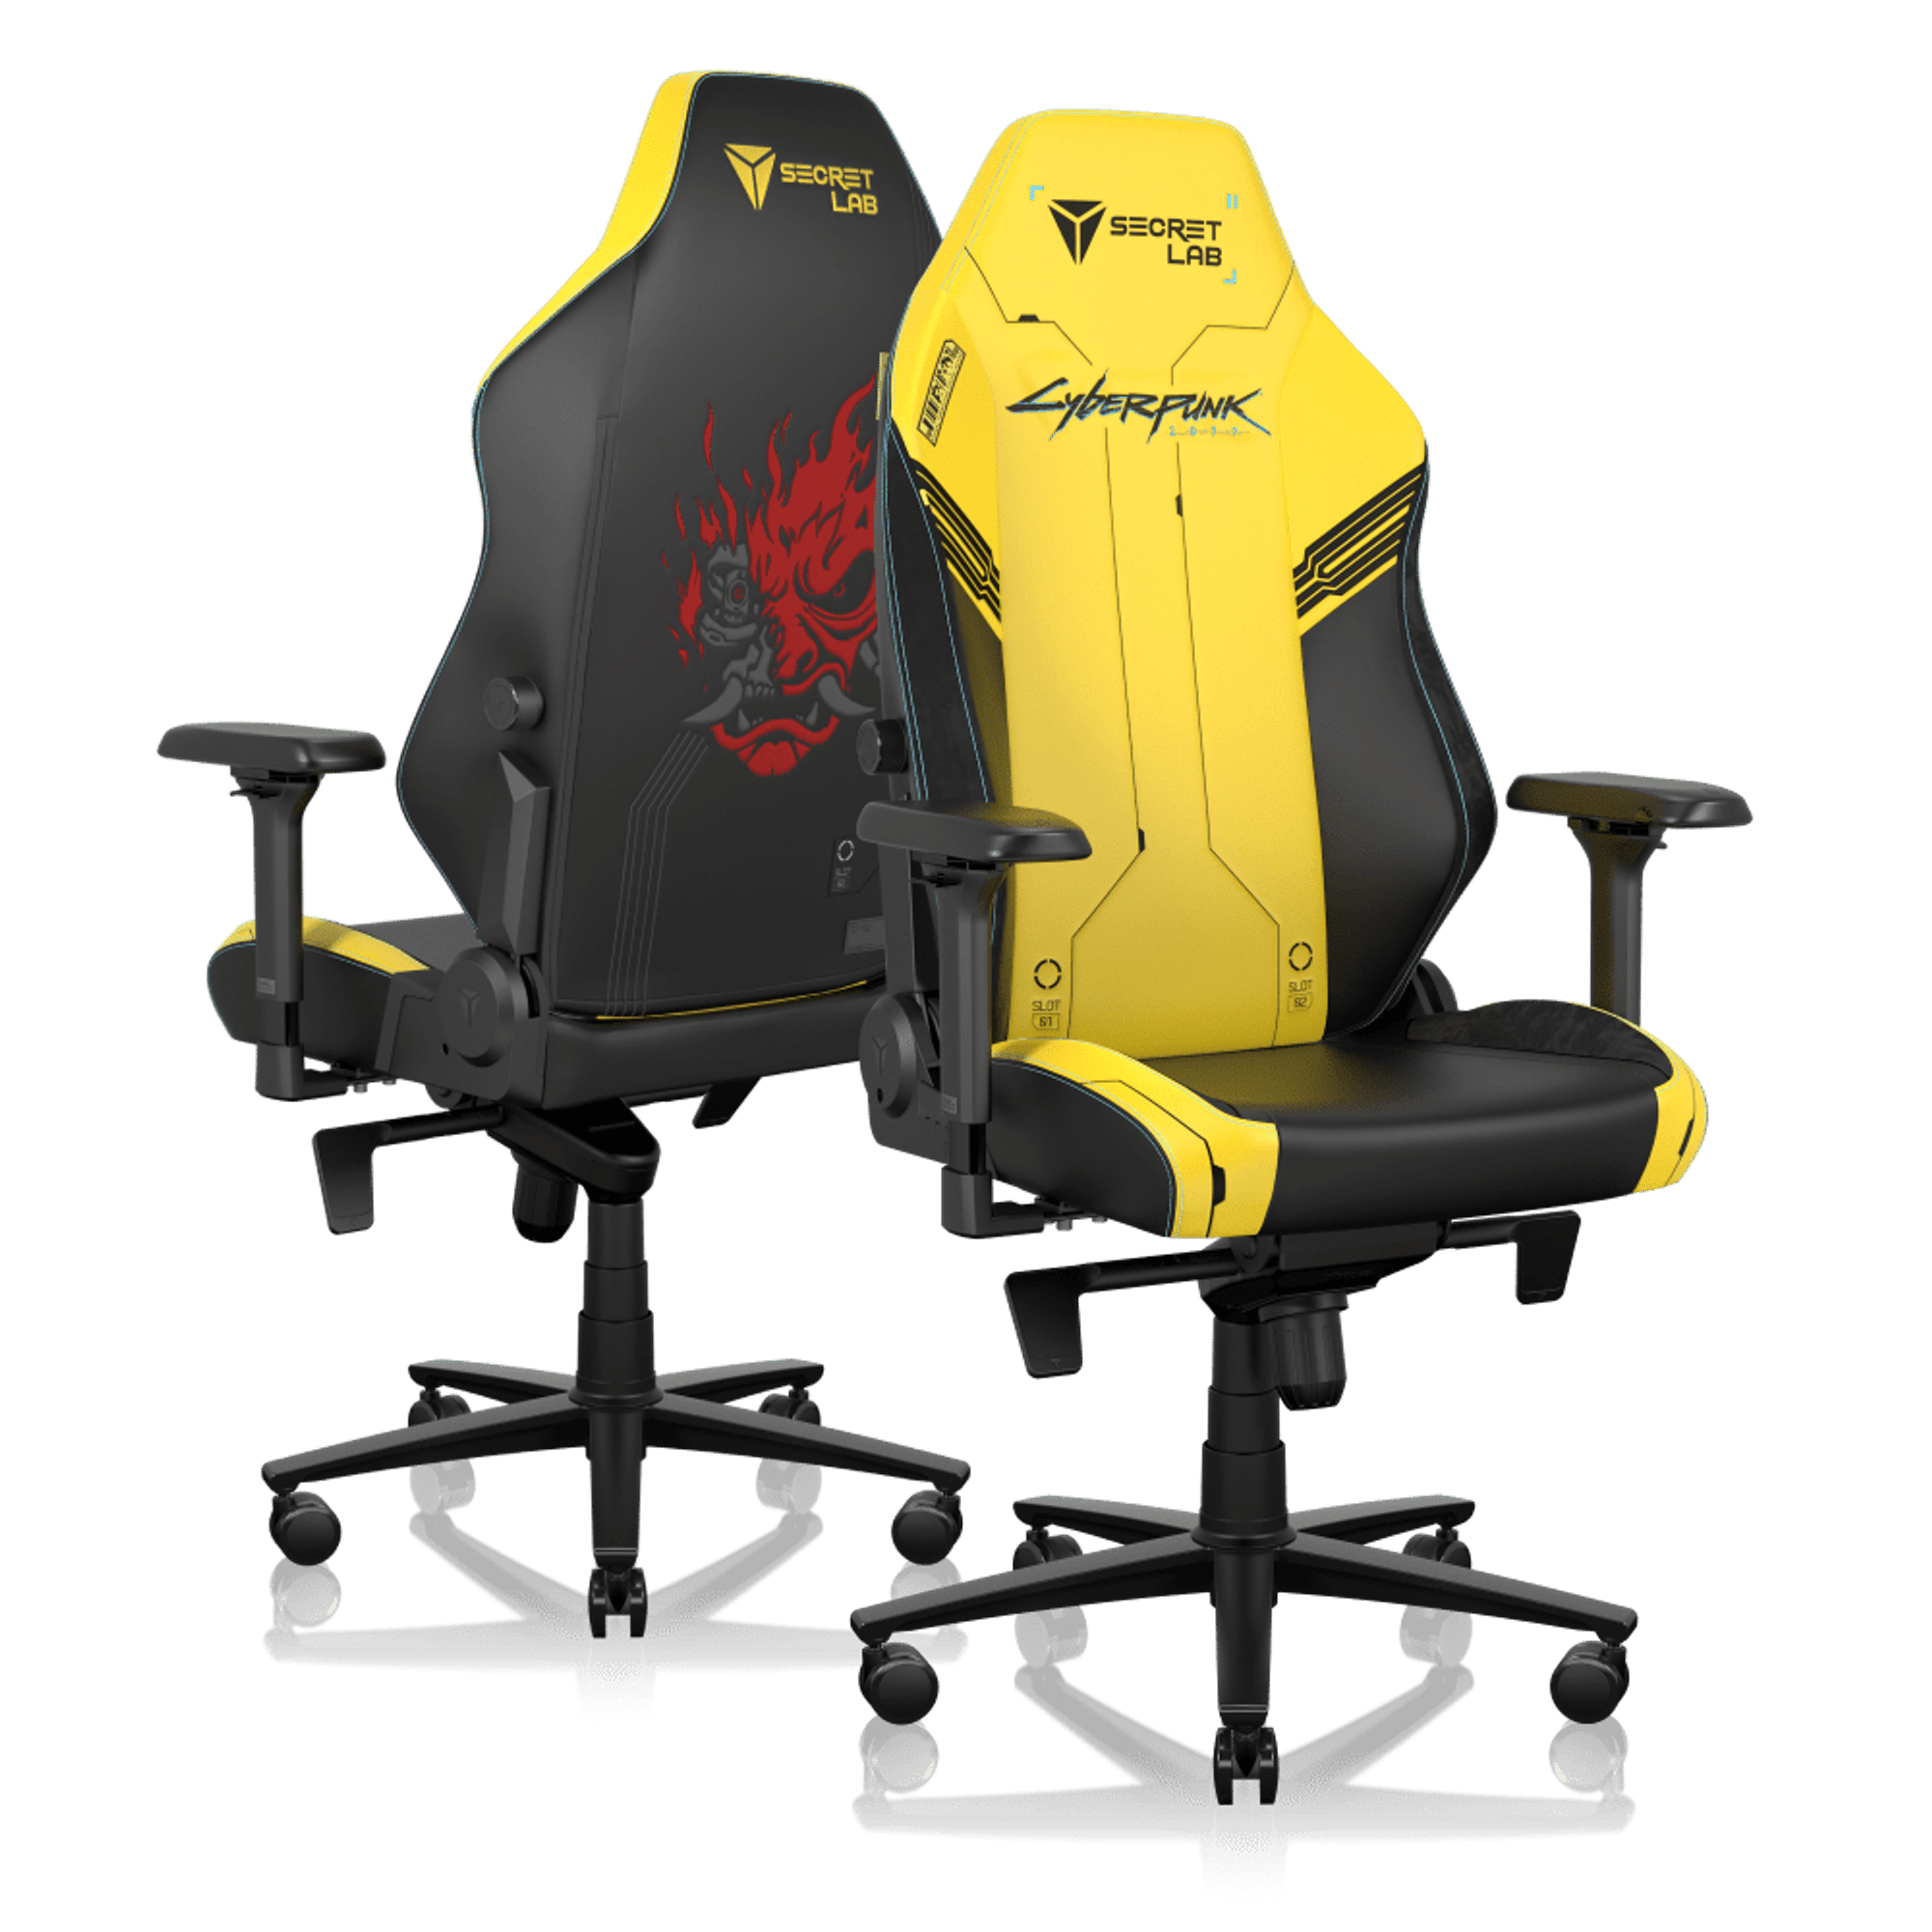 Unboxing Kursi Gaming Secret Lab Cyberpunk 2077 Indonesia – Tips And ...